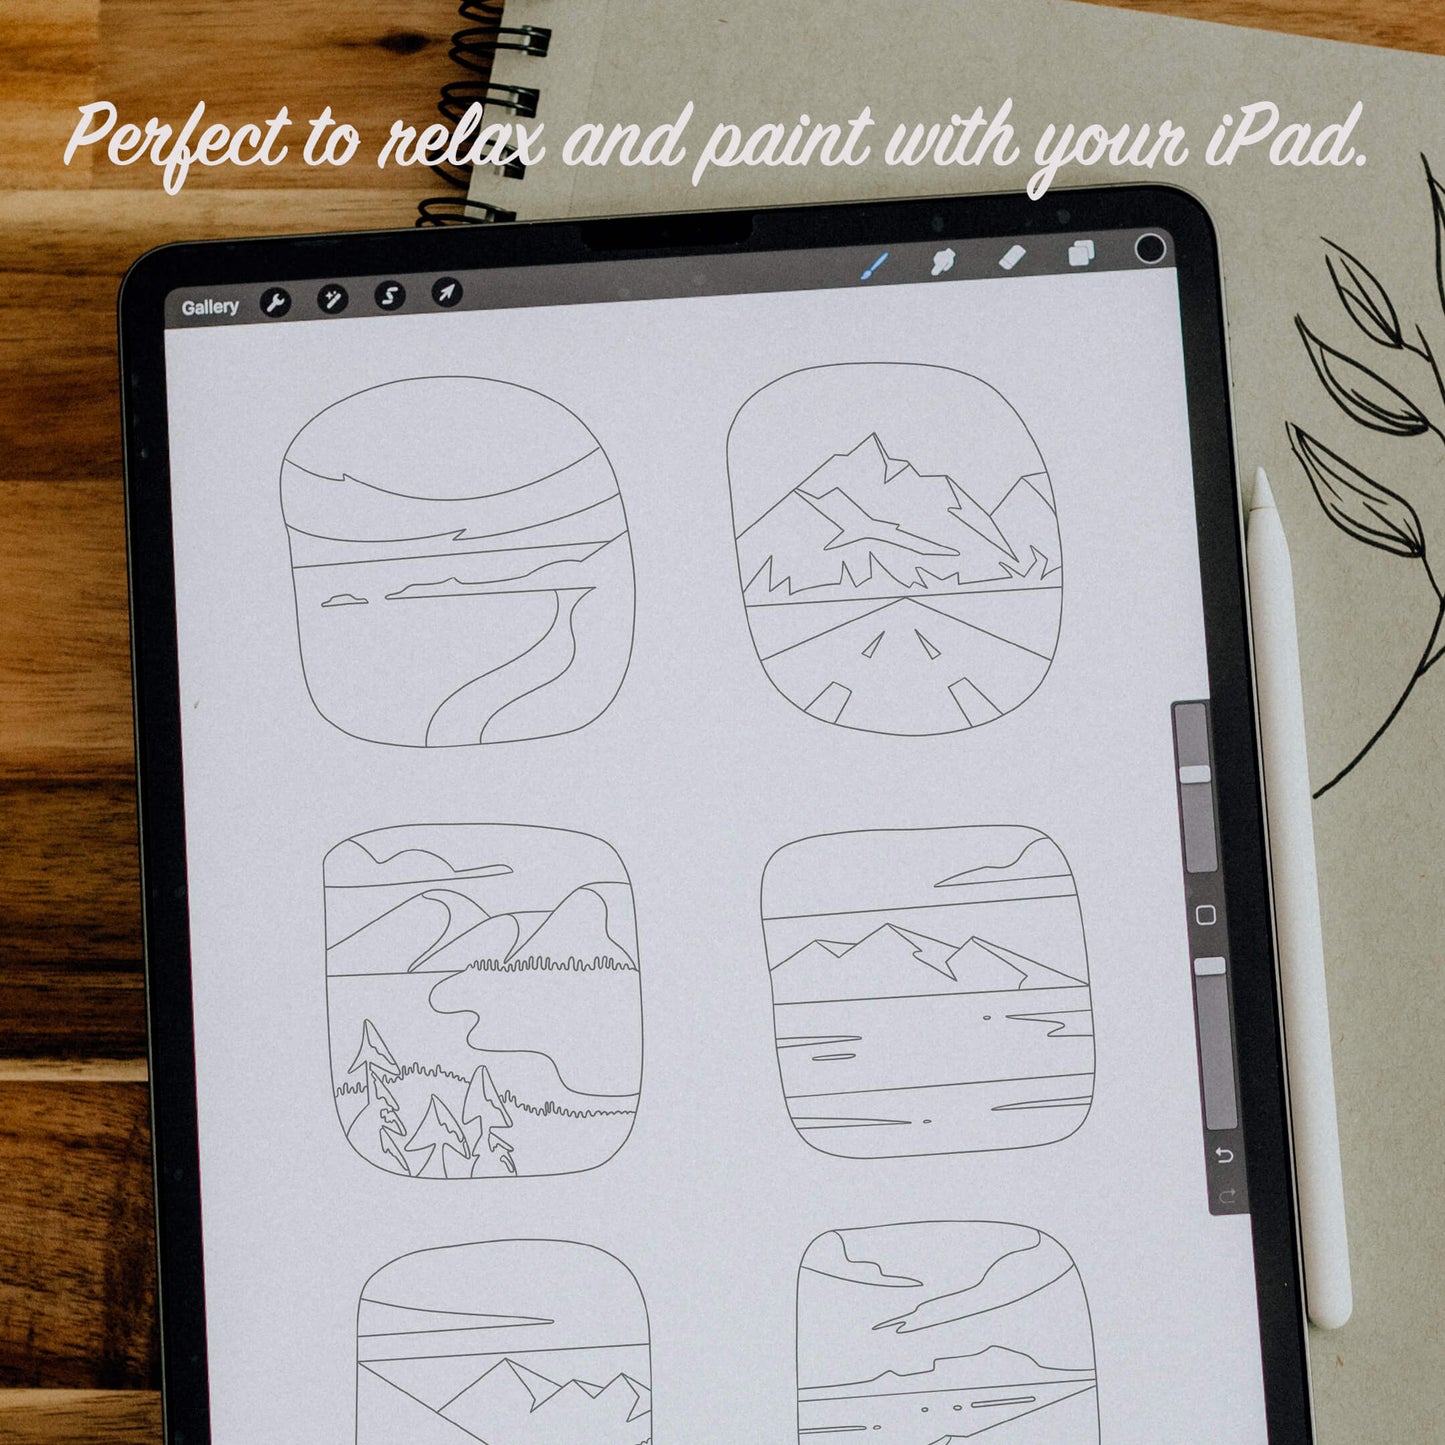 Printable colouring page with landscapes grid design.